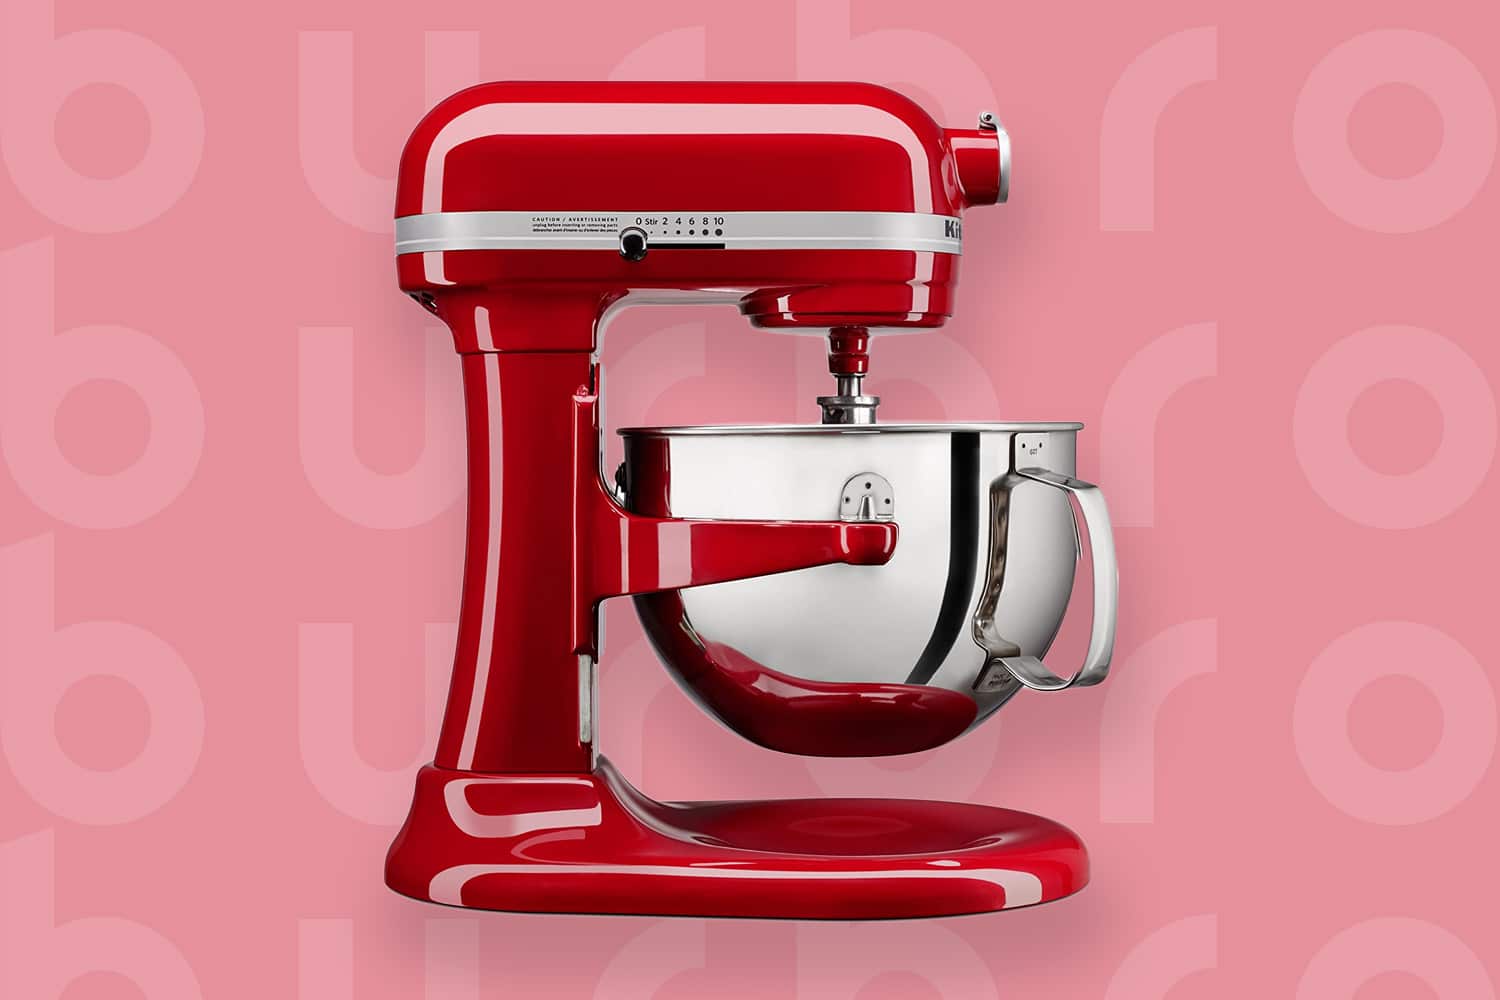 This is the cover photo for our Best Stand Mixer article. It features a red Cuisinart stand mixer overlaying a light red background with an embossed Burbro logo.